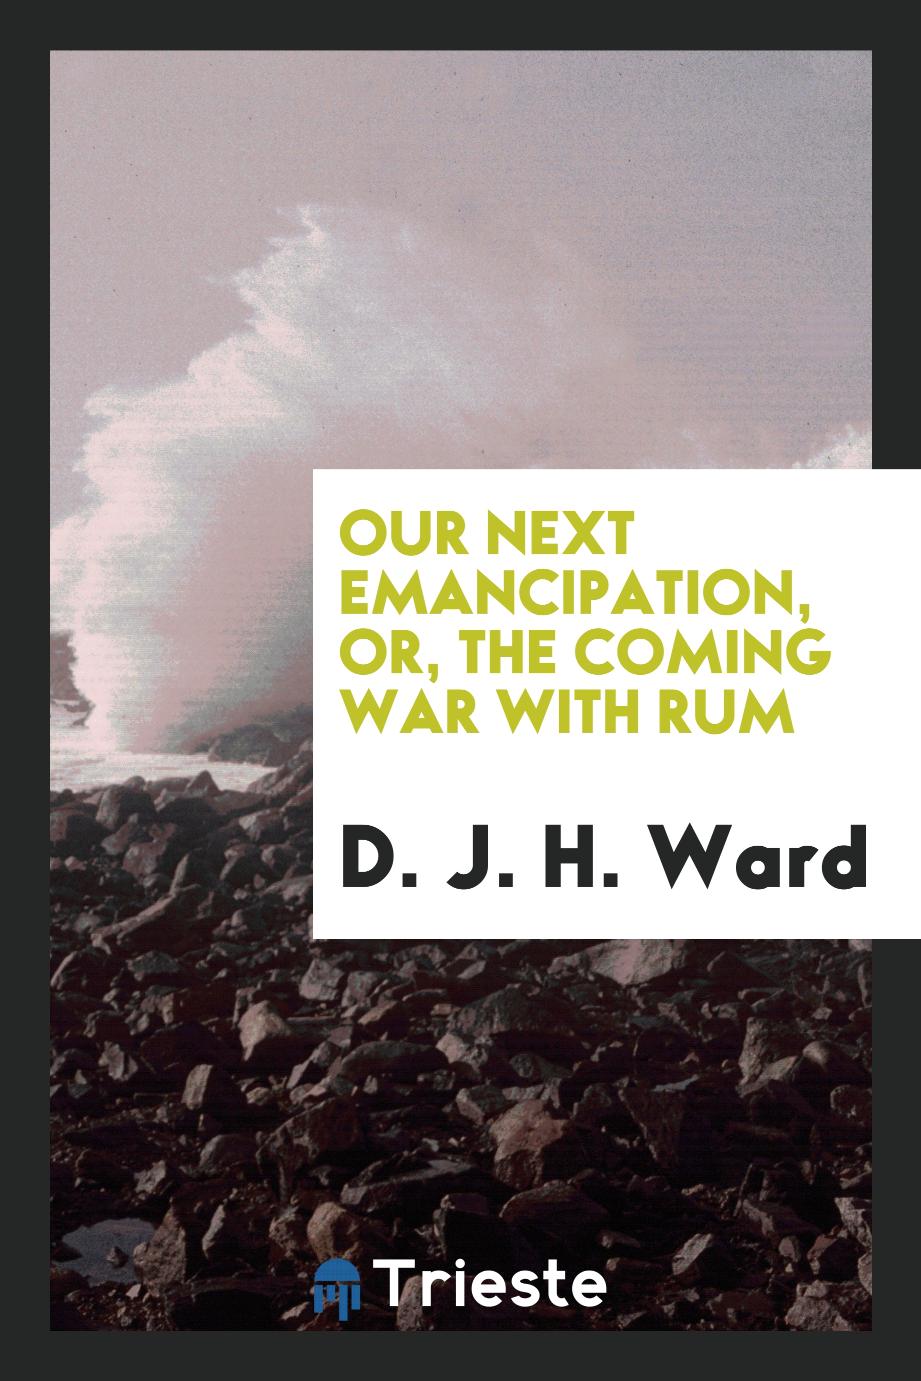 Our next emancipation, or, the coming war with rum